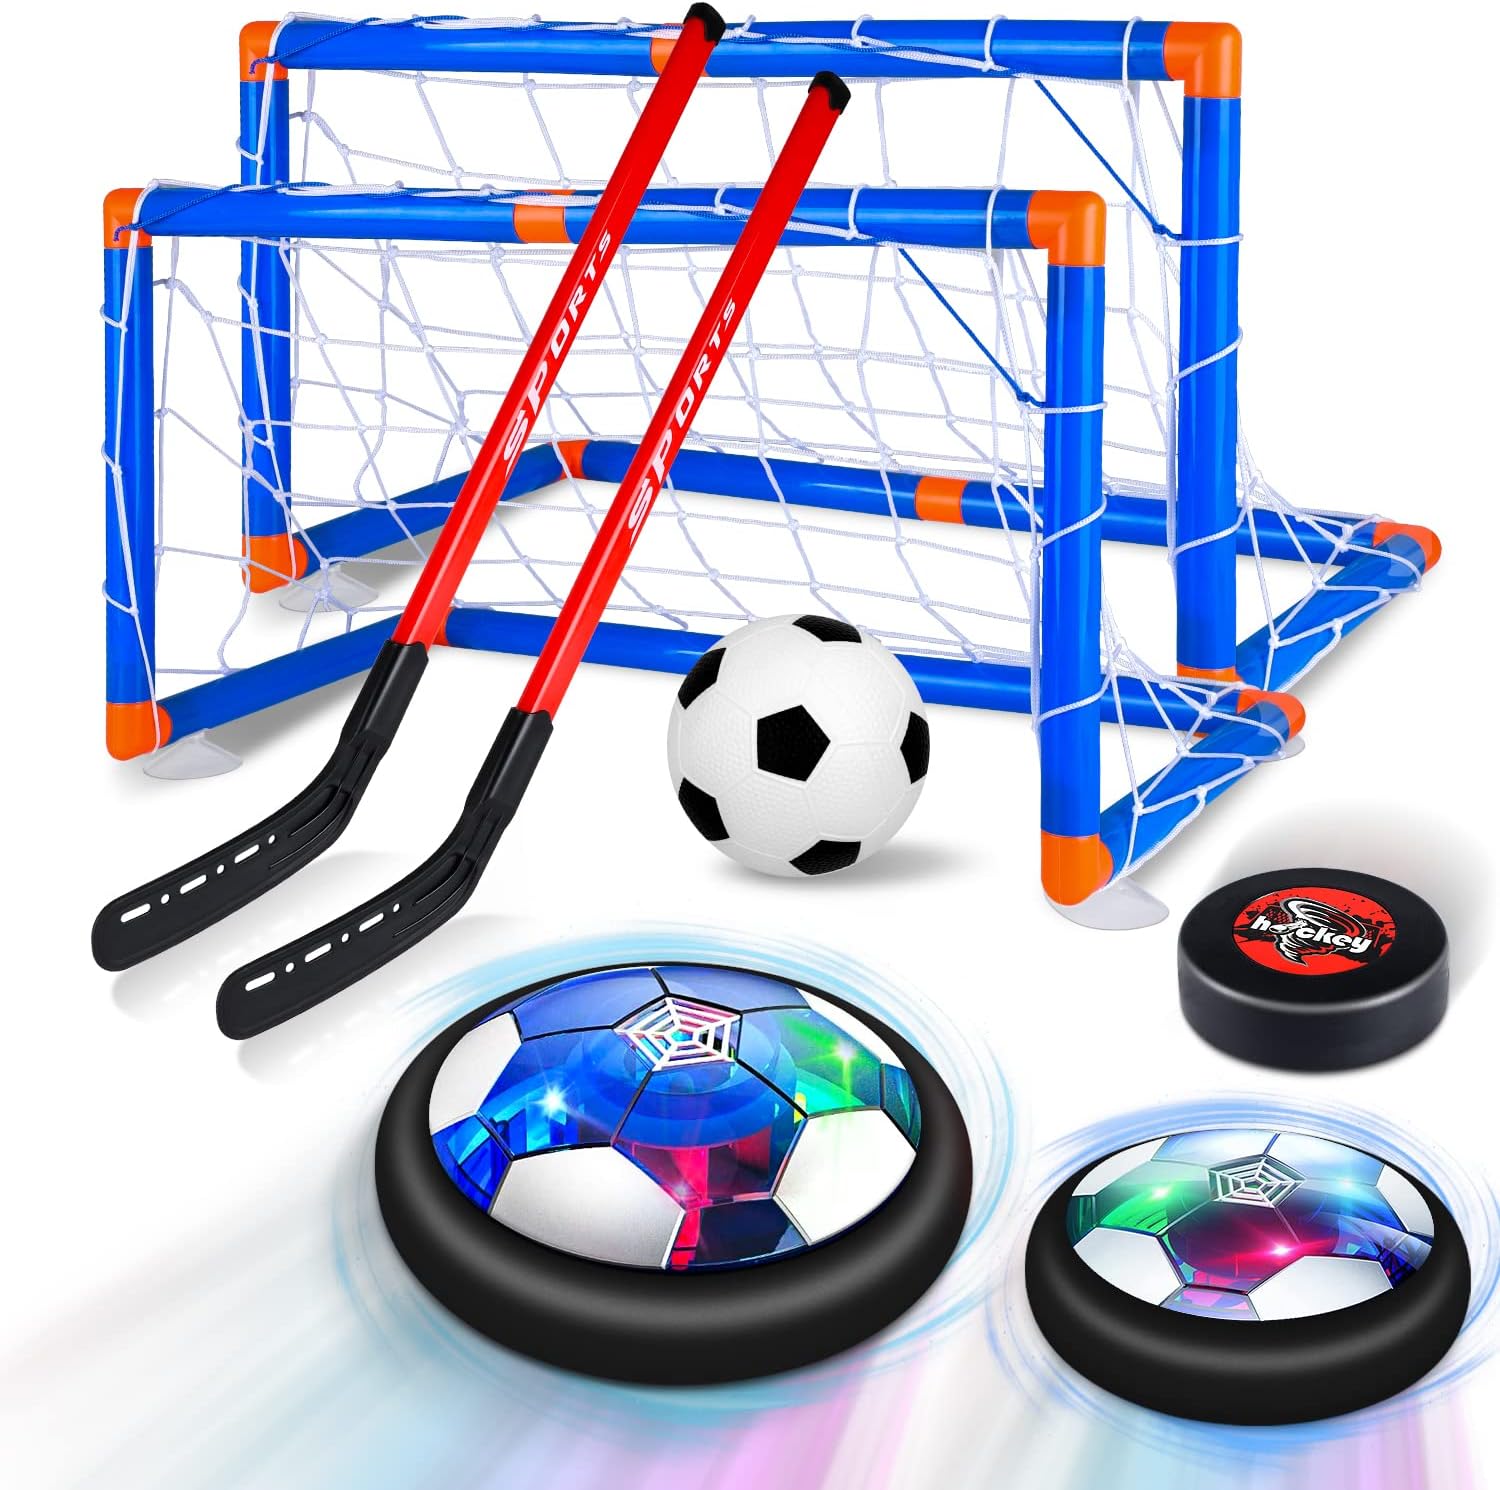 AOKESI Kids Toys 4-in-1 Hover Soccer Ball Hockey Sports Set with 2 Goal | USB Rechargeable Ice Hockey Ball with LED Starlight Light Indoor Outdoor Sports Ball Game, Sports Toy for Boy Girl Gift